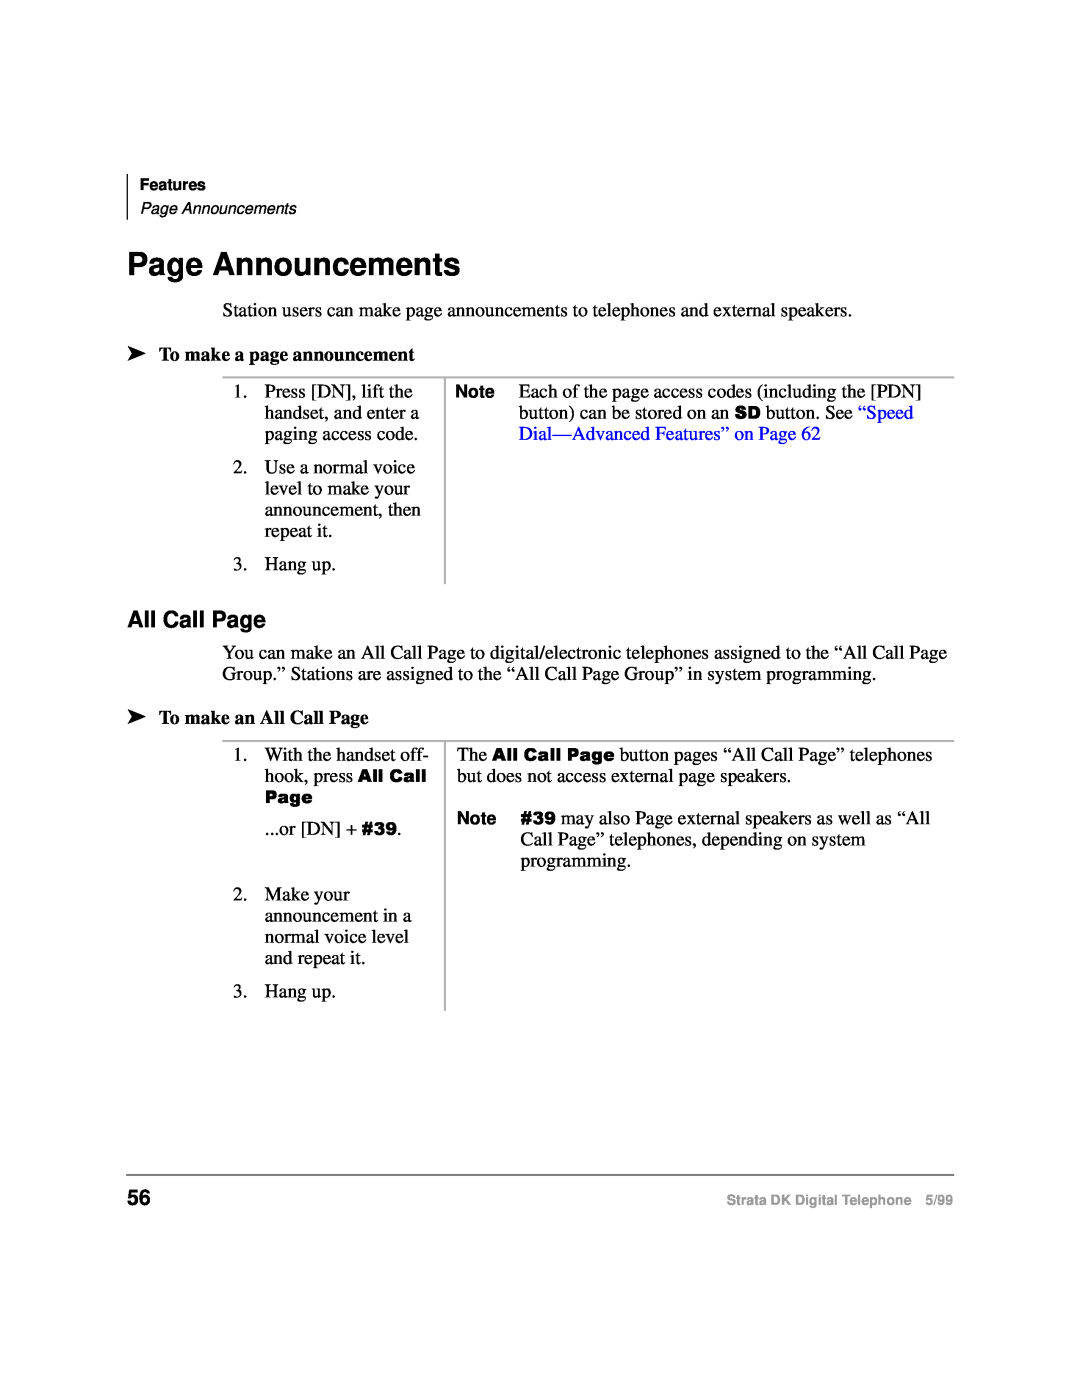 Toshiba CT manual Page Announcements, To make a page announcement, To make an All Call Page 